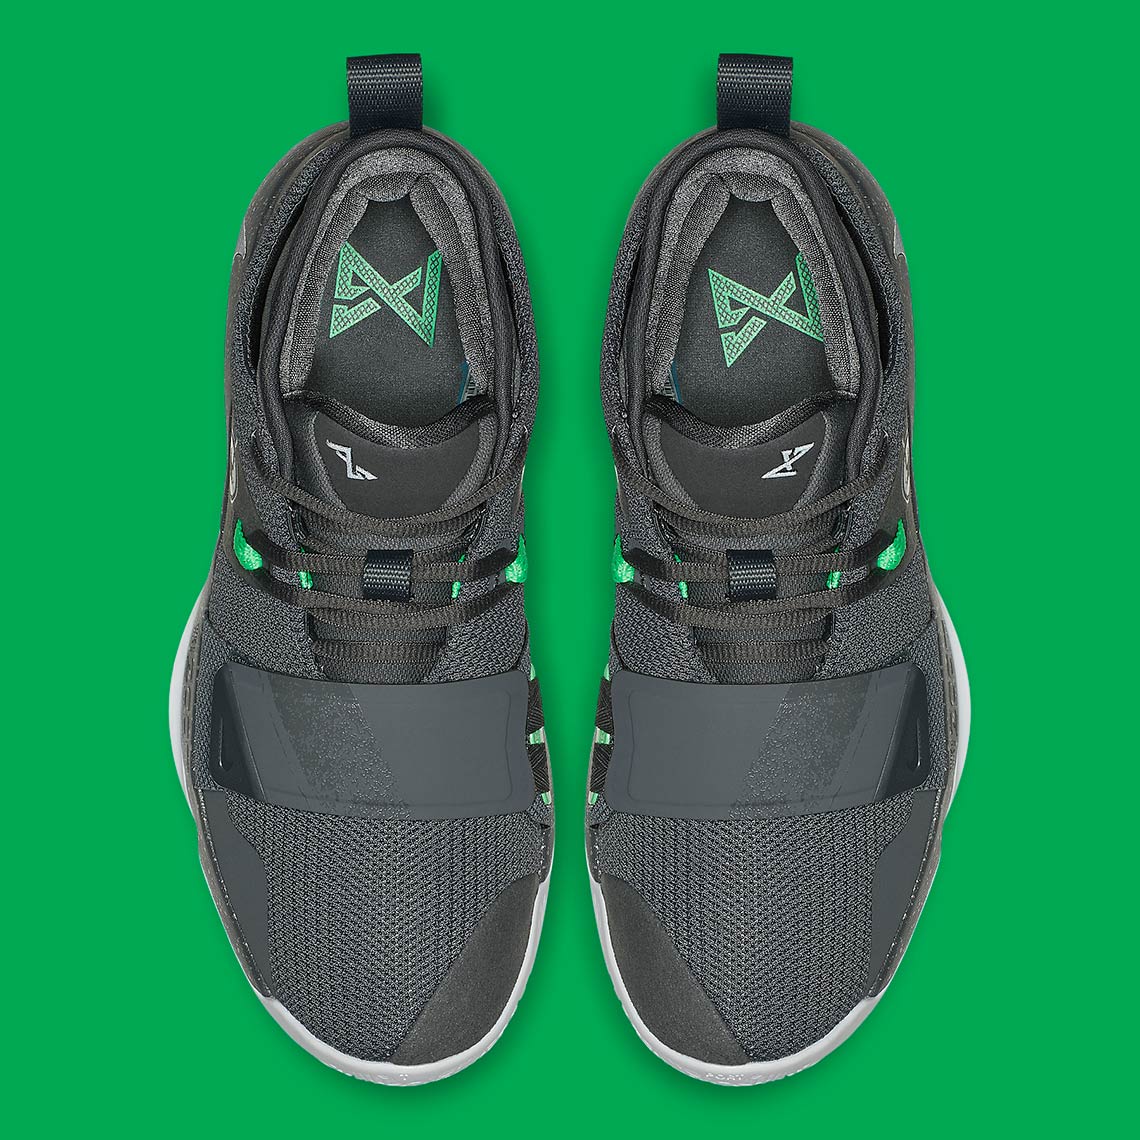 pg 2.5 grey and green